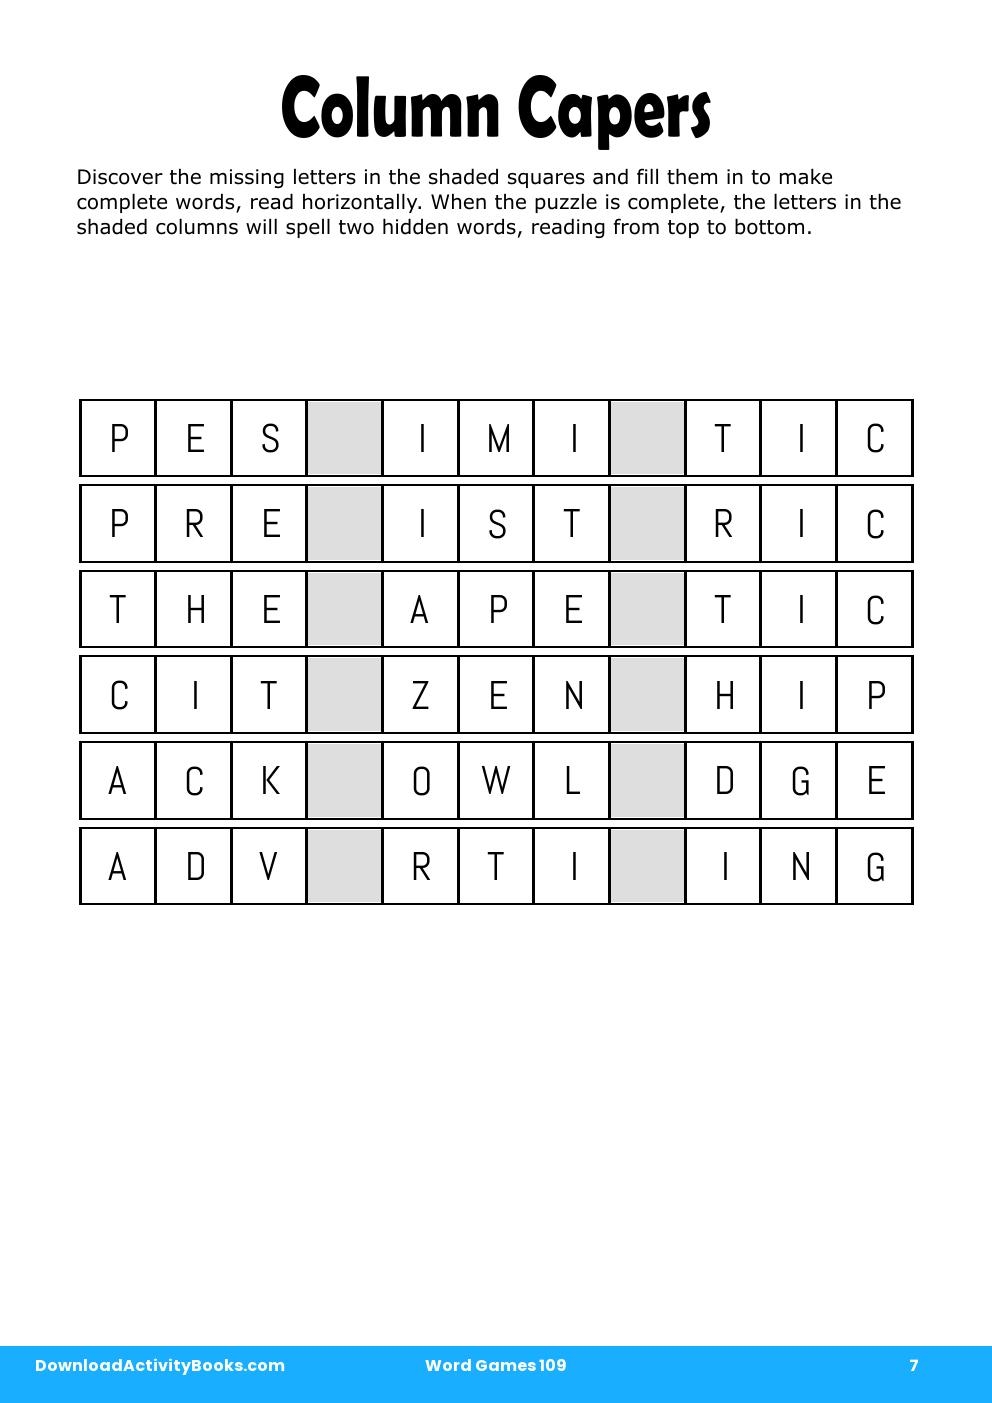 Column Capers in Word Games 109